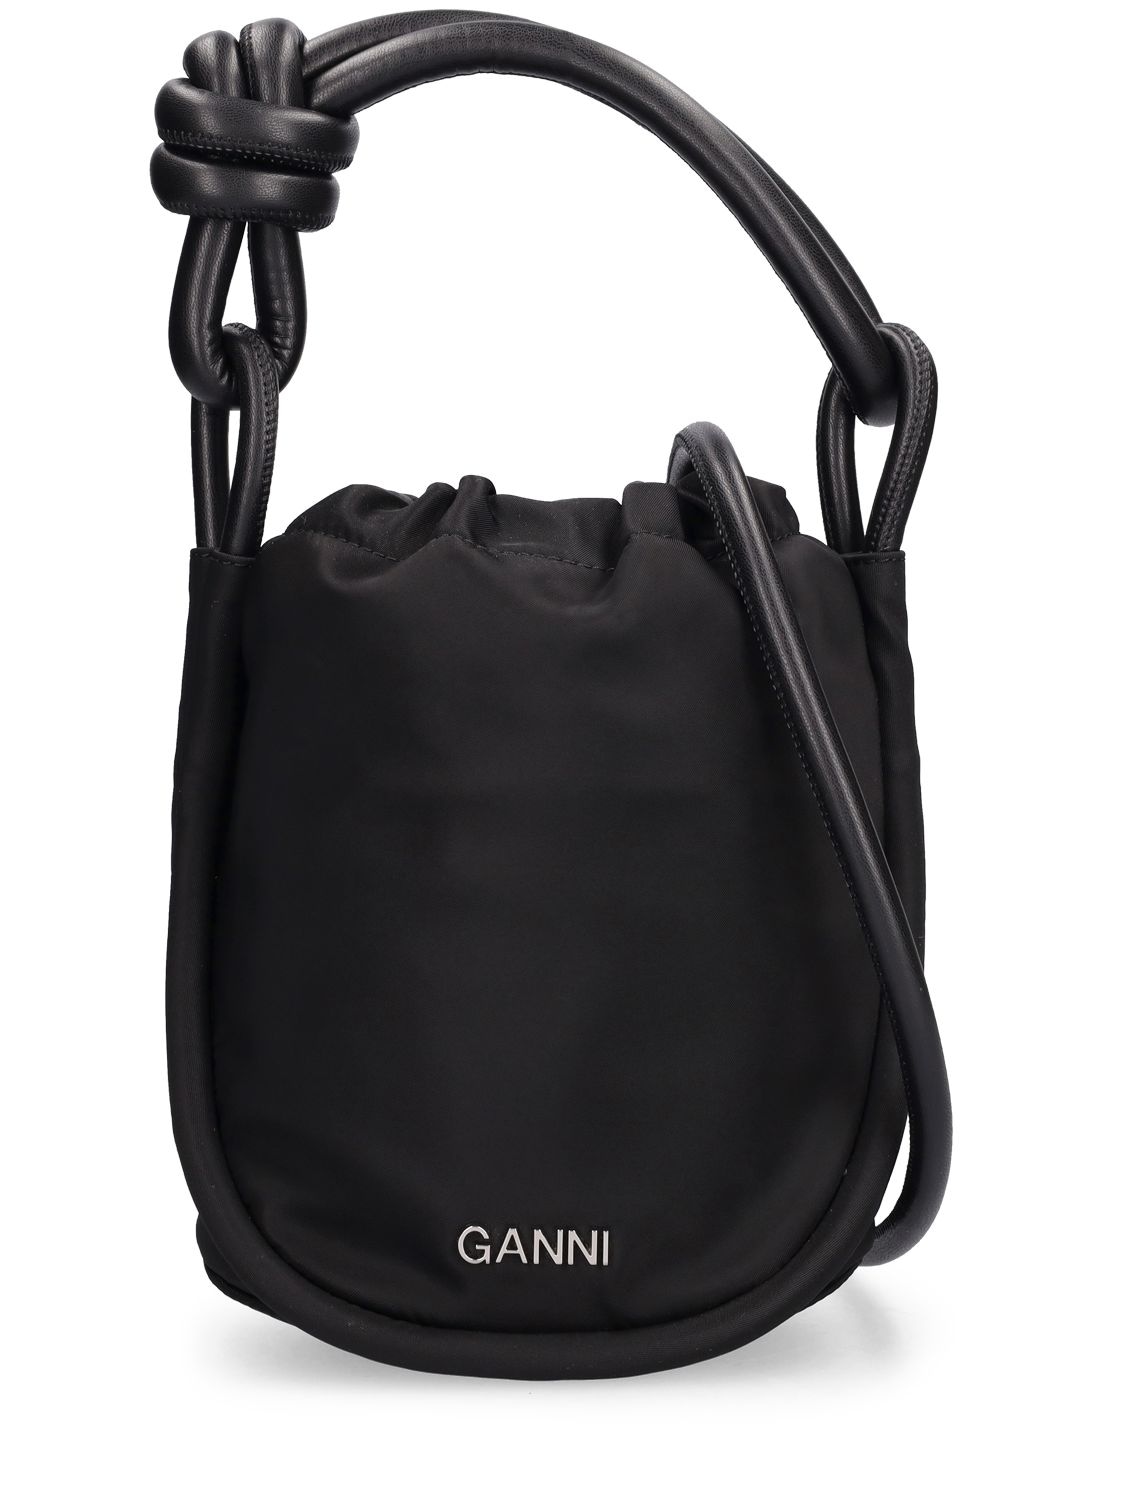 GANNI Small Knot Recycled Tech Bucket Bag